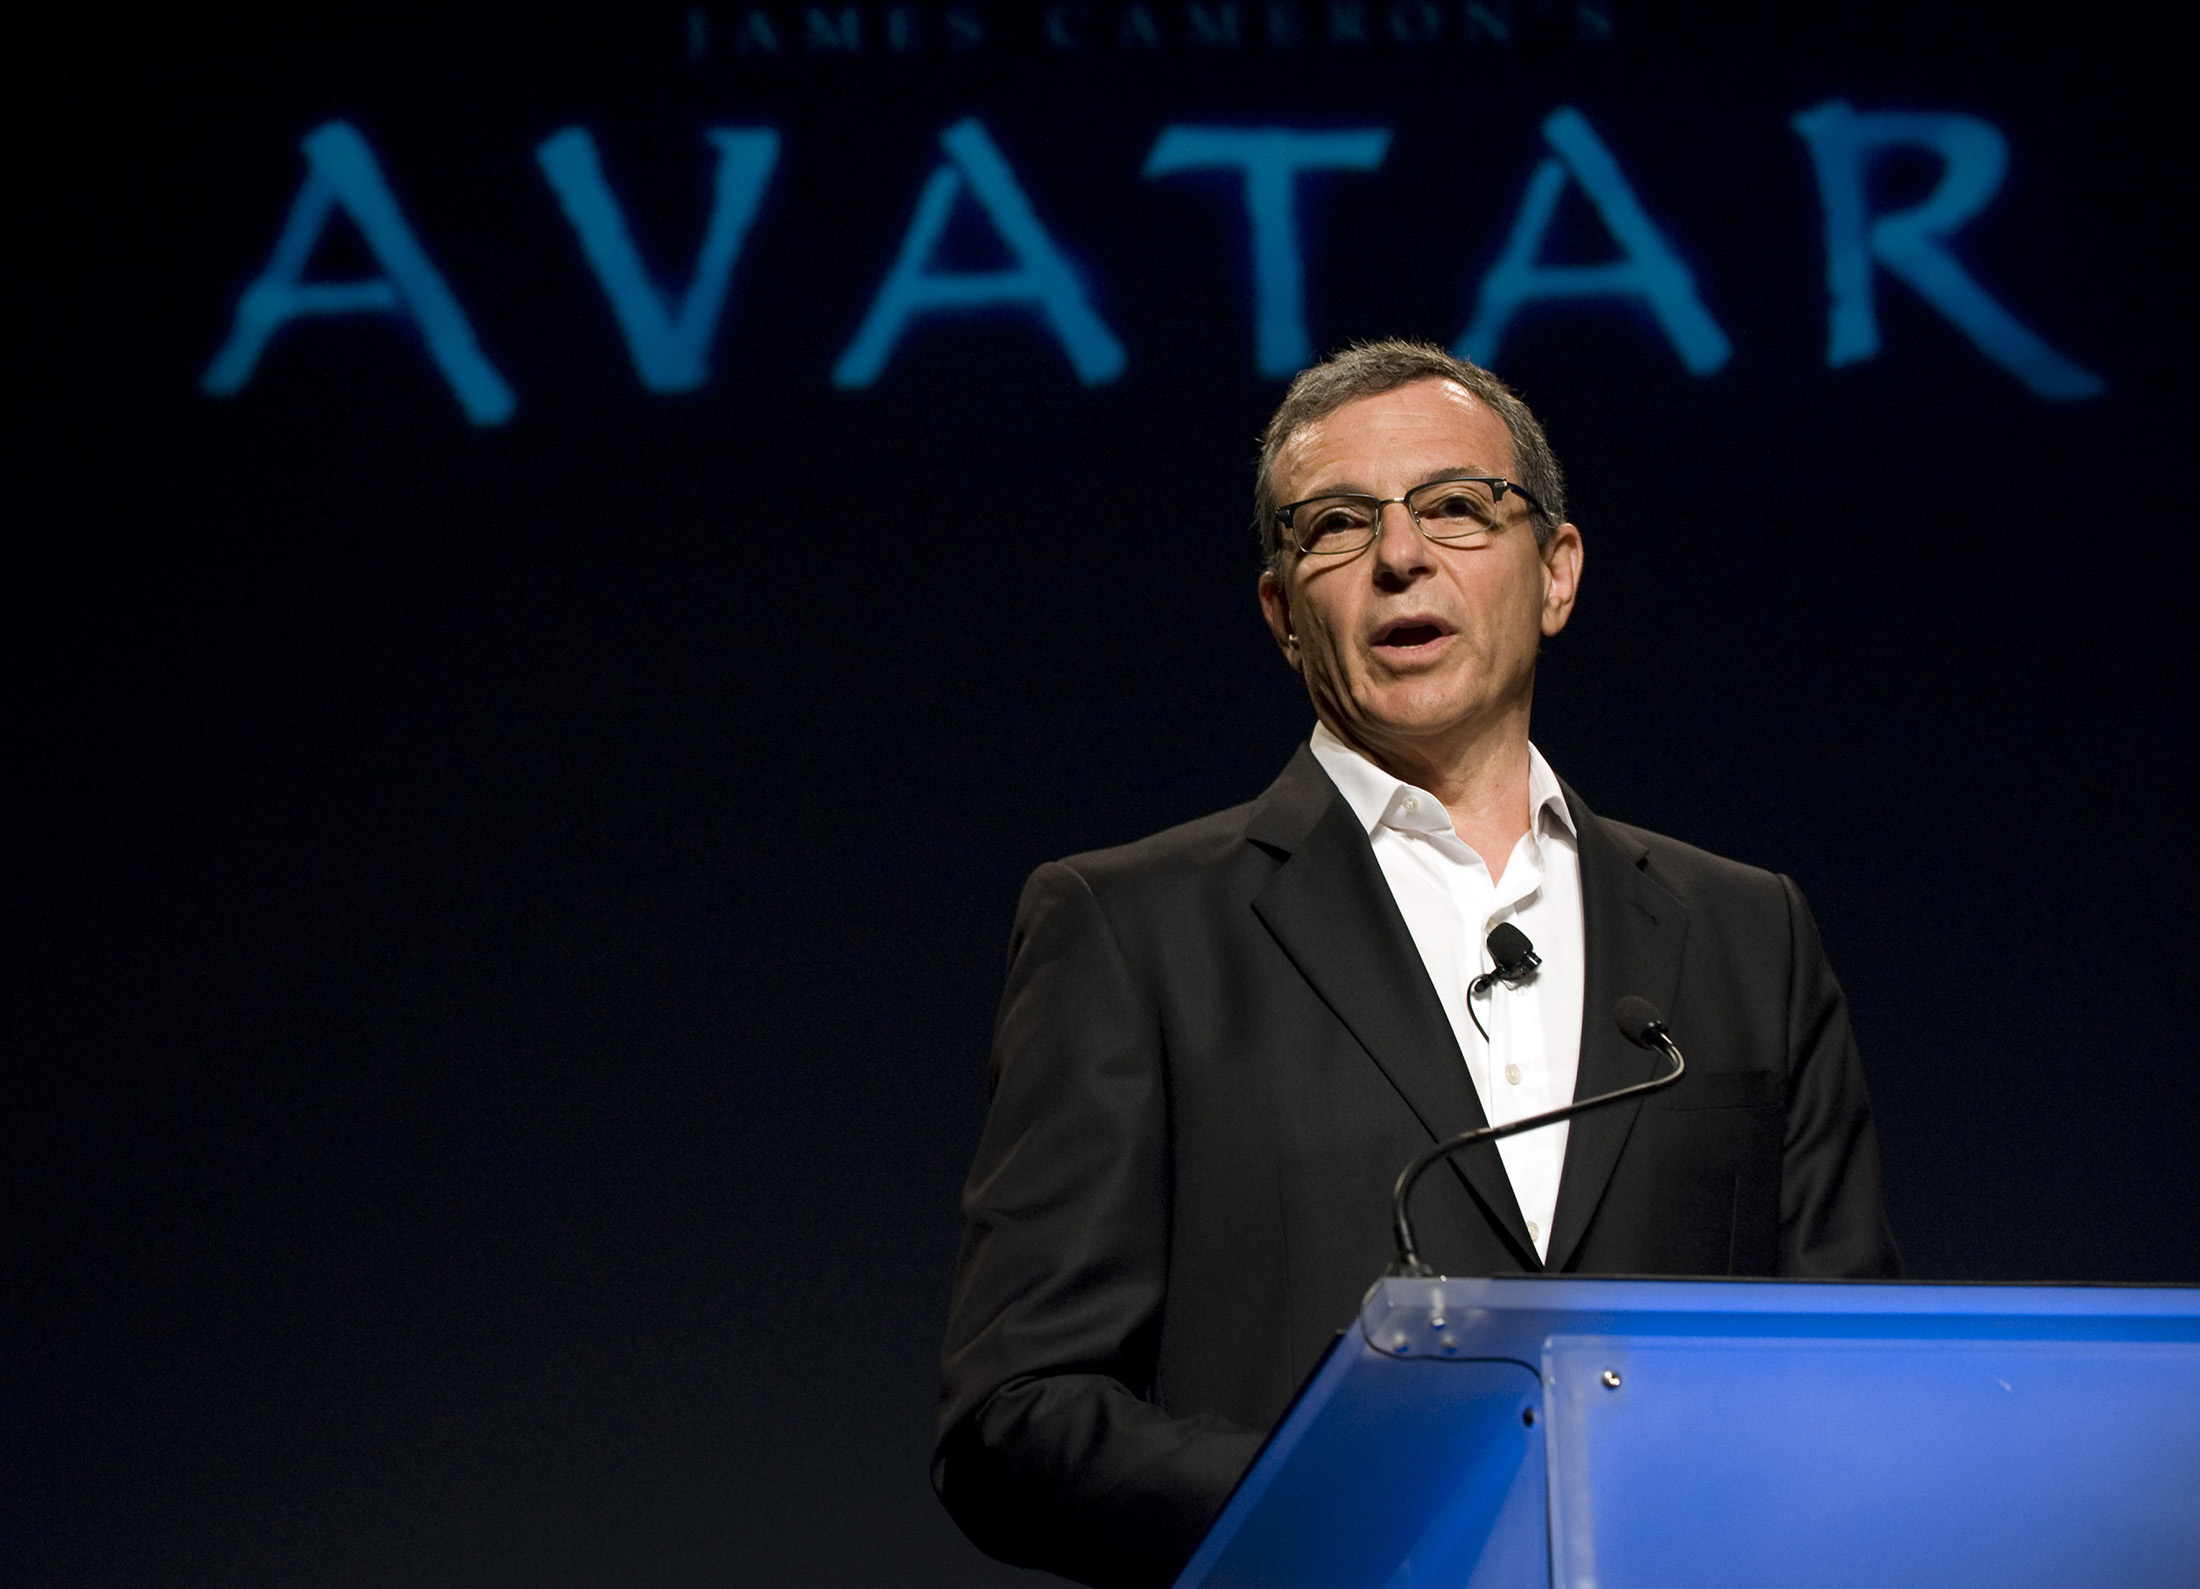 relates to The Avatar Sequel Is a Make-or-Break Moment for Disney’s $71 Billion Fox Deal